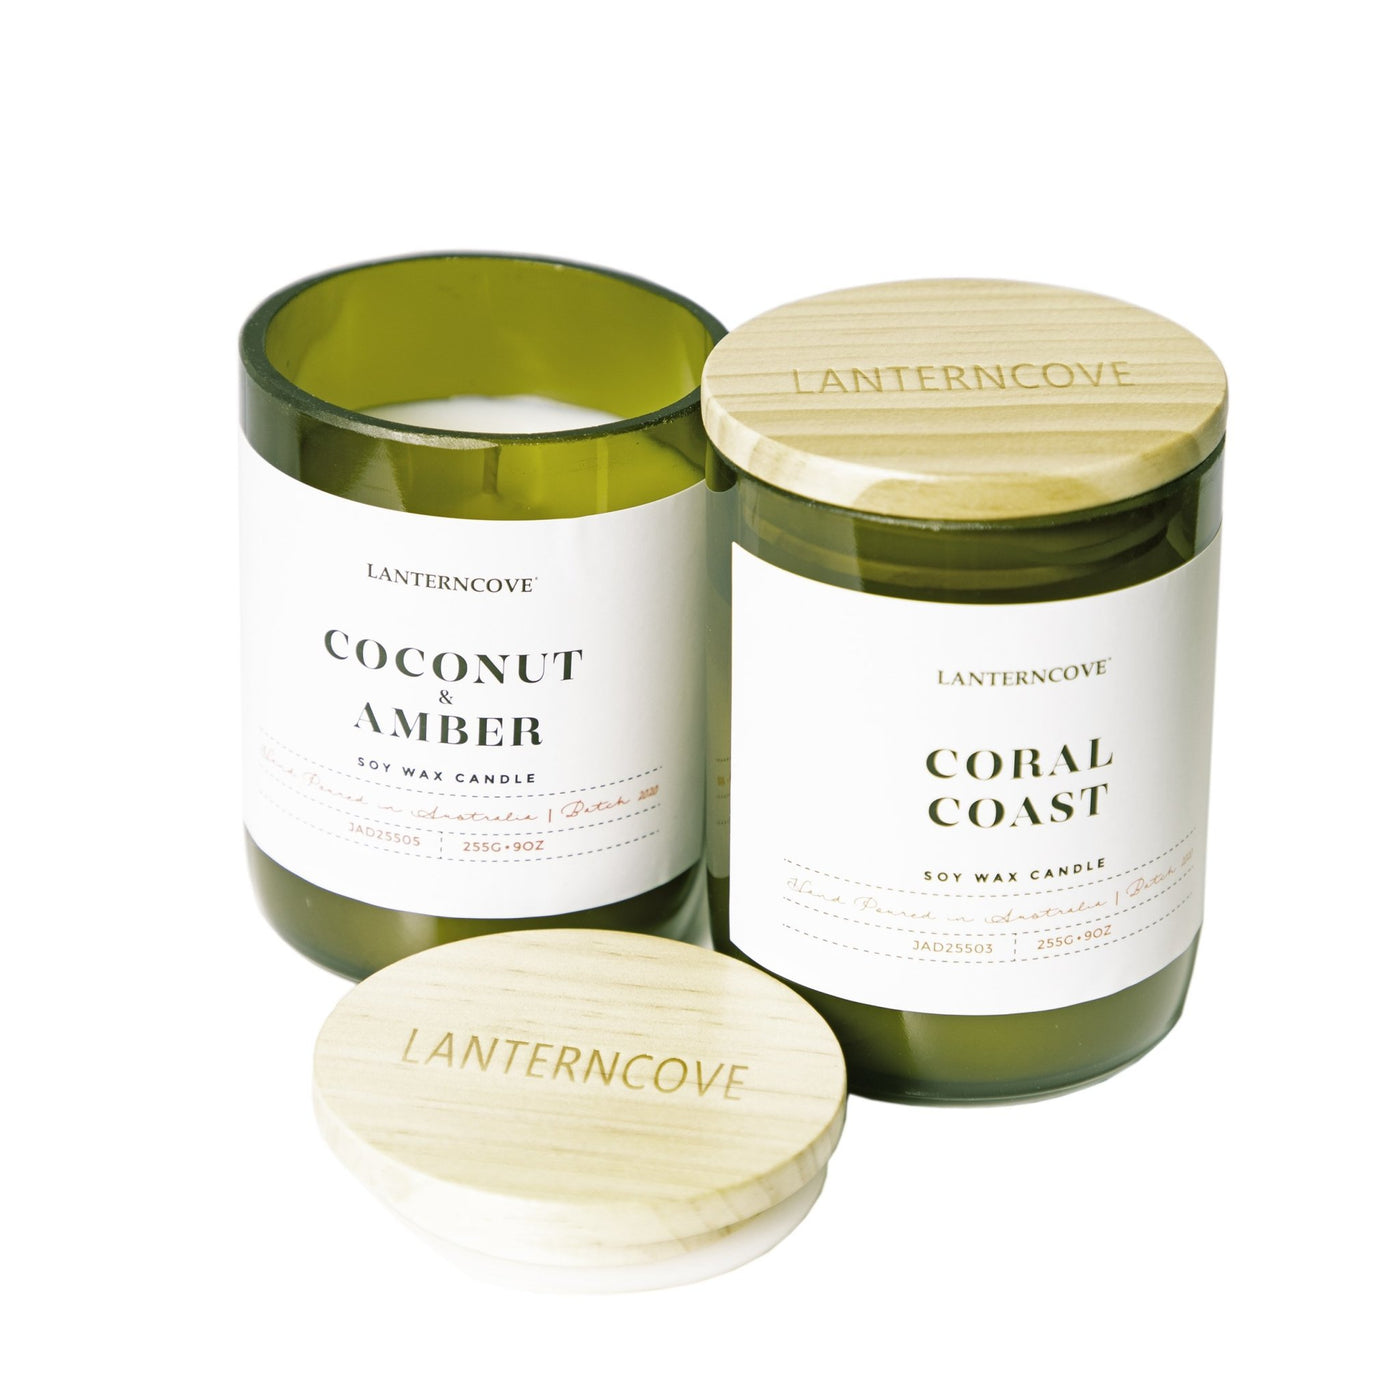 Lantern Cove Jade Coconut and Amber 9oz Soy Candle - Hey Sara